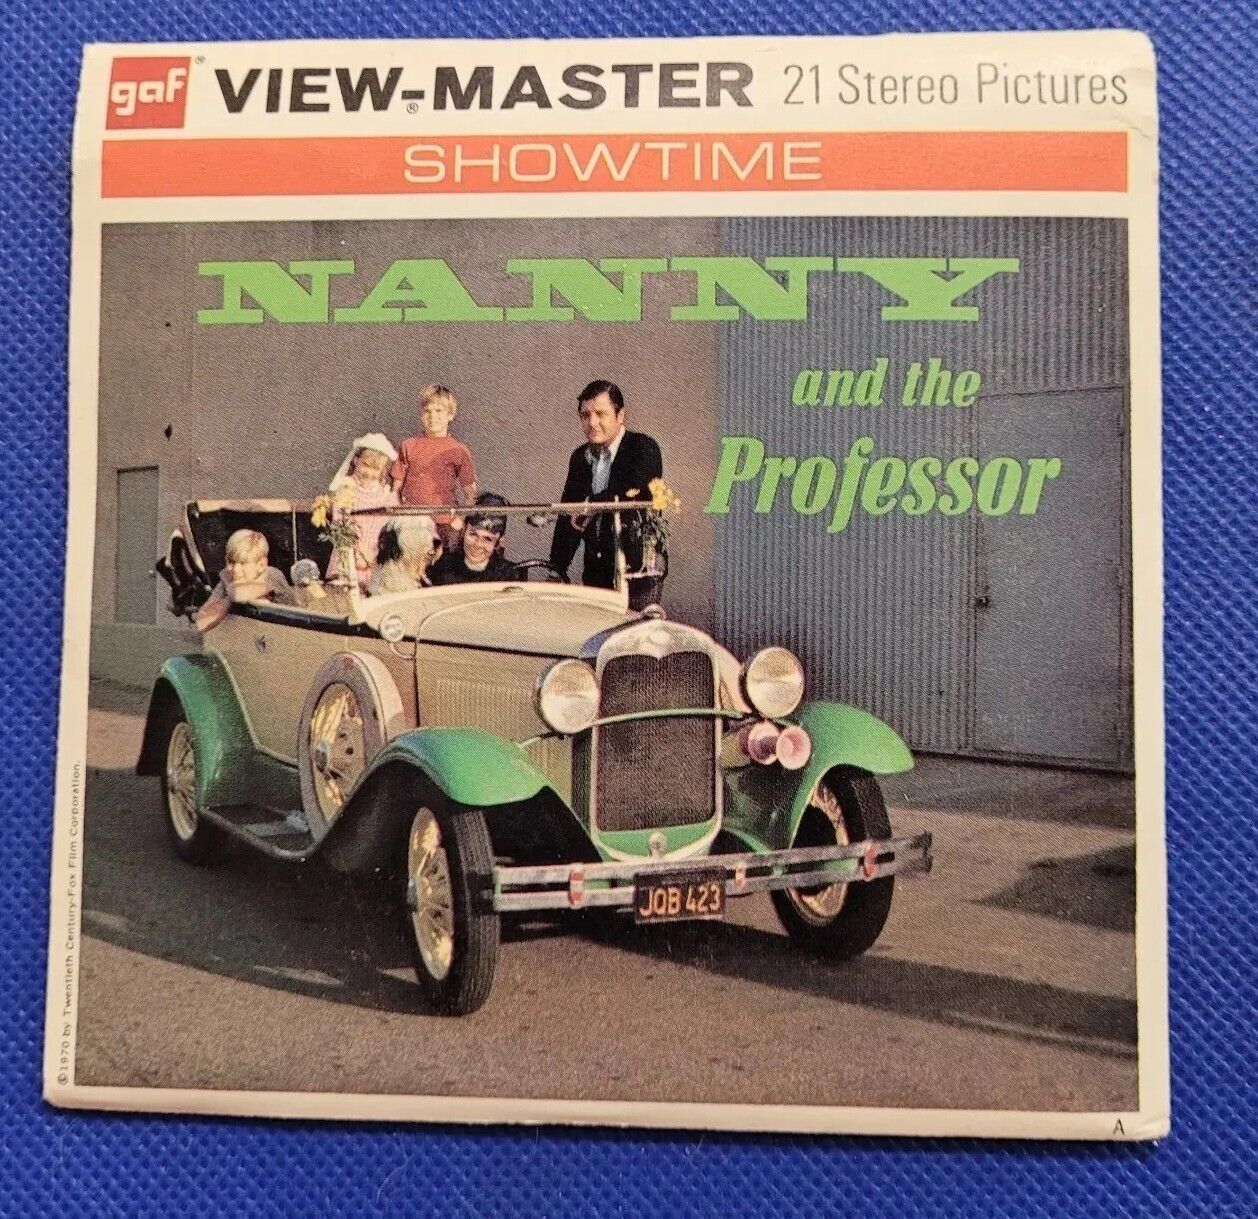 Rare Color gaf B573 Nanny and the Professor TV Show  view-master 3 Reels Packet